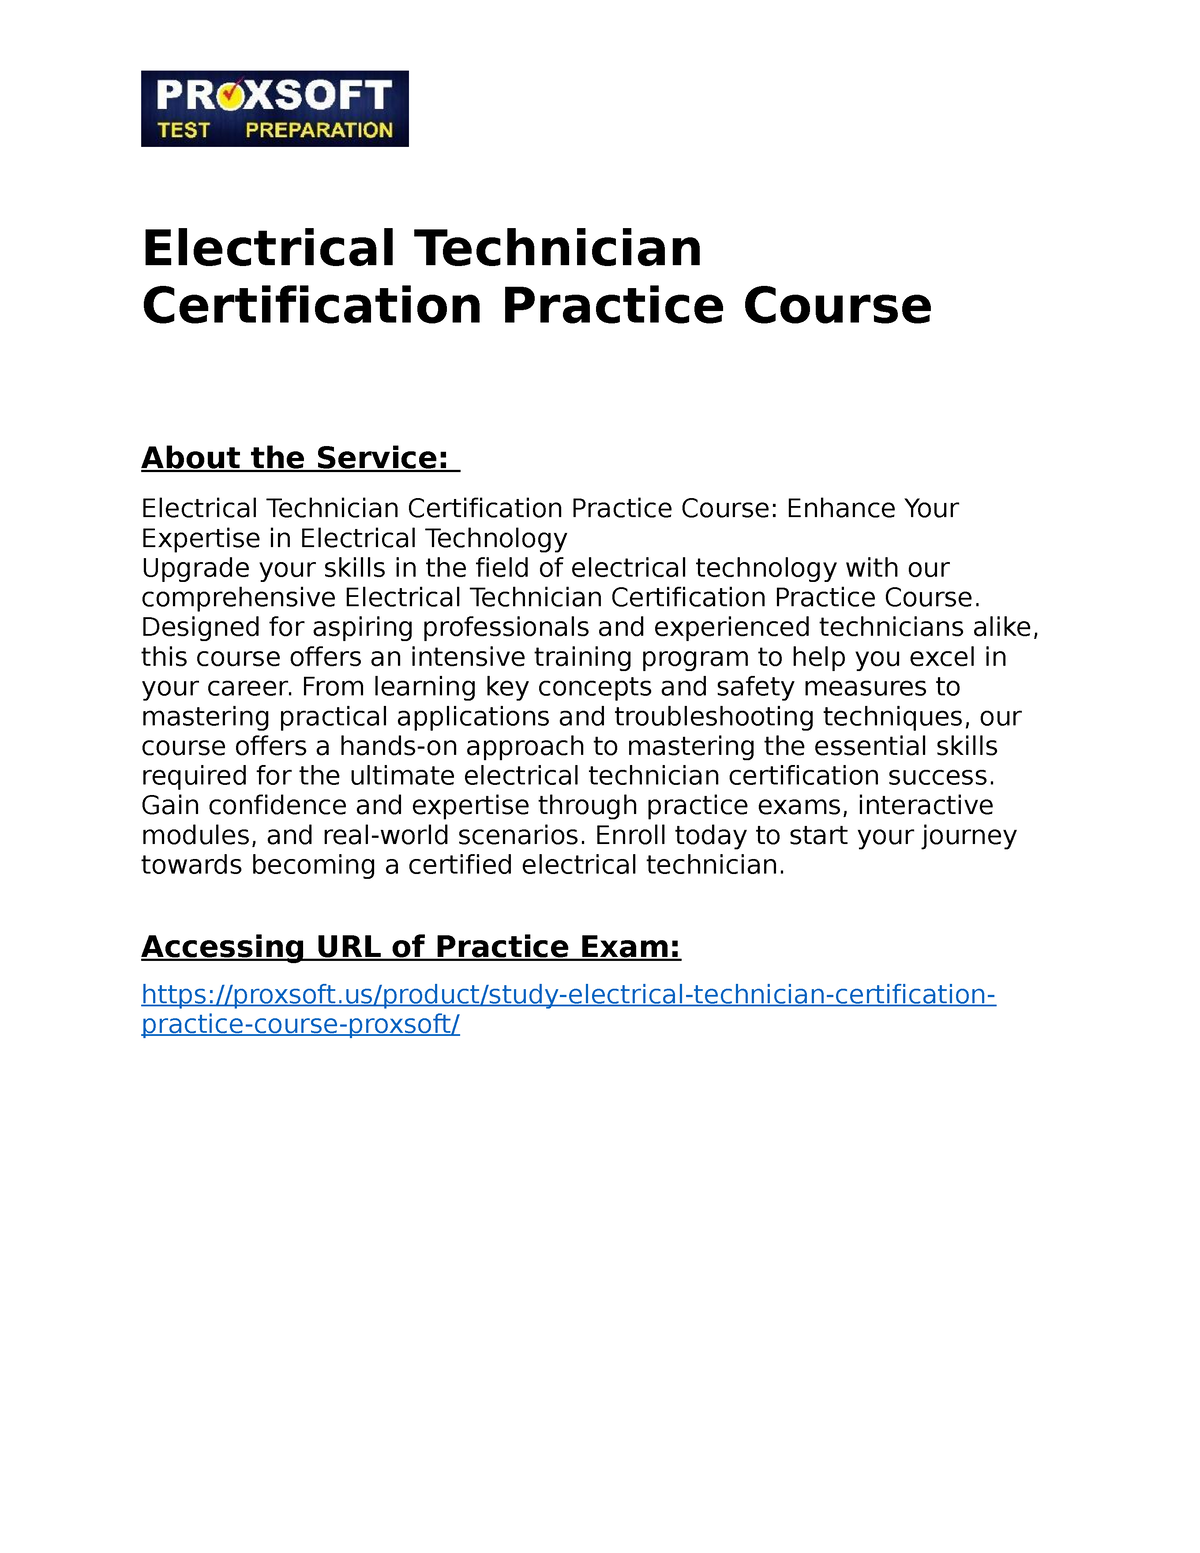 Electrical Technician Certification Practice Course Designed for